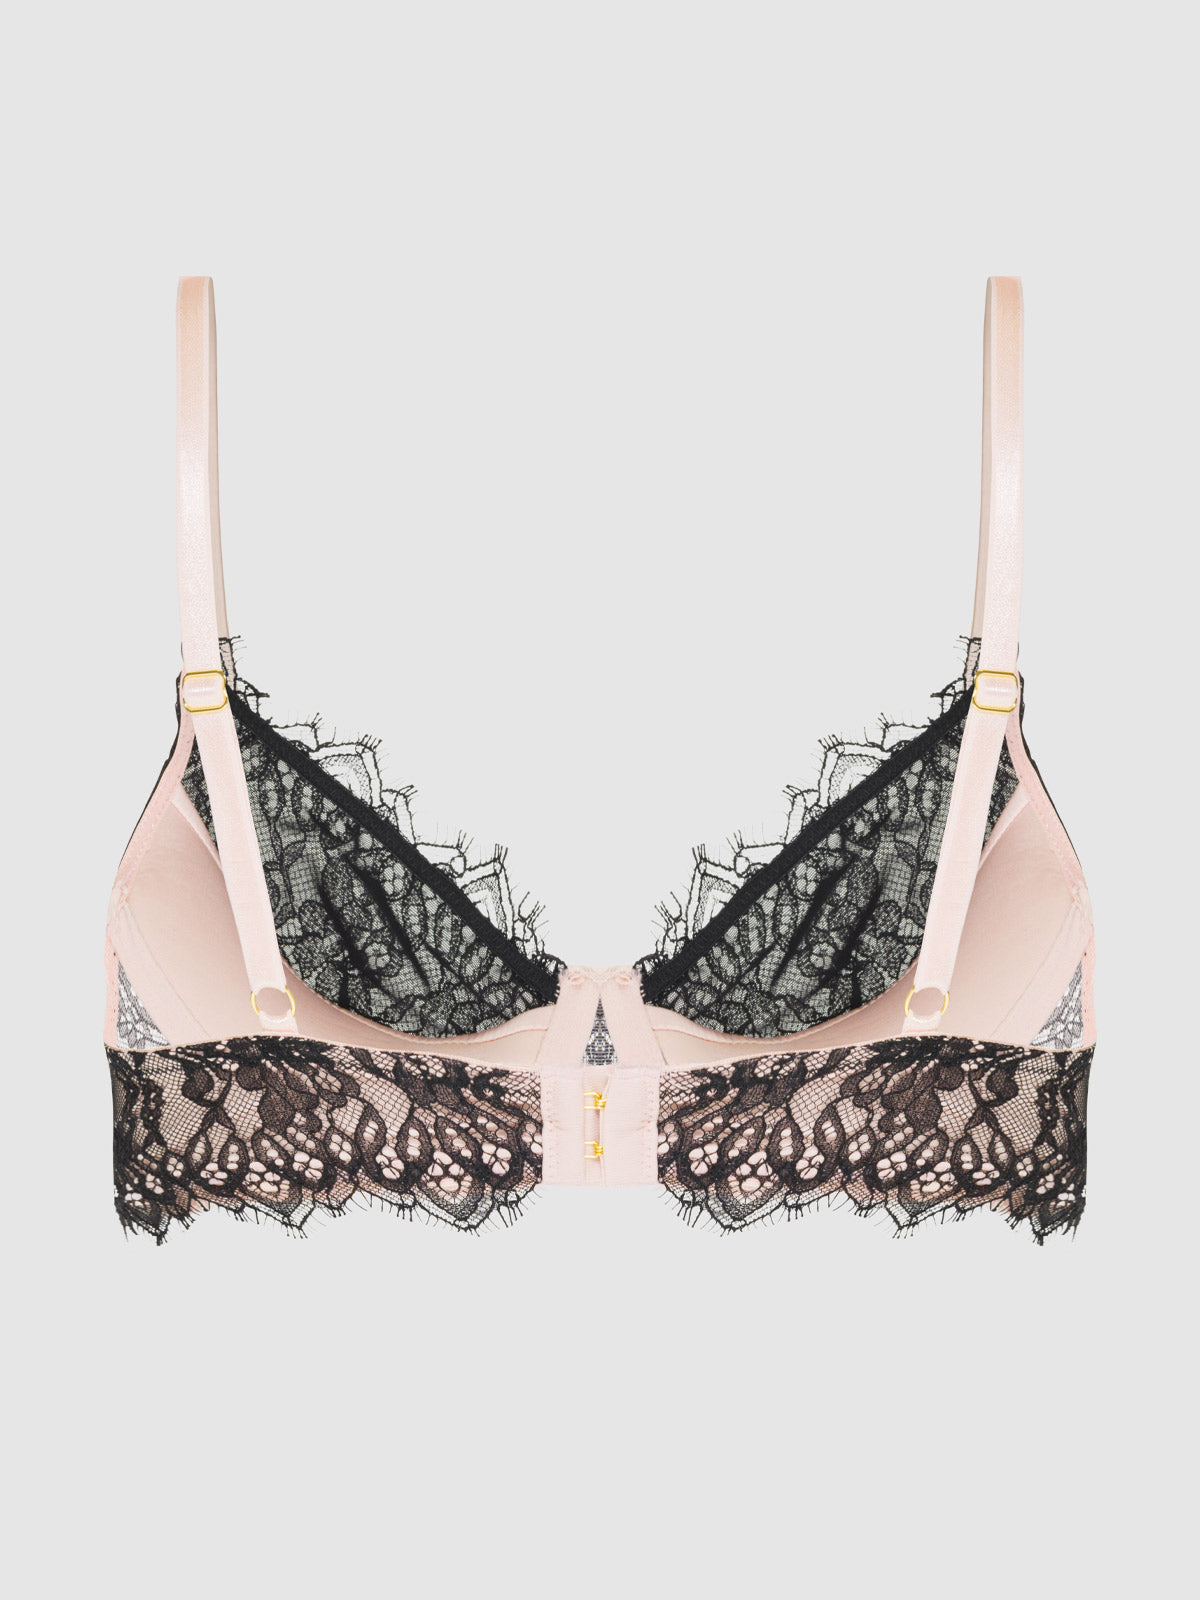 Ophelia Lingerie - NEW IN: Charnos Rosalind Full Cup Body in C to F cups.  Browse or buy here